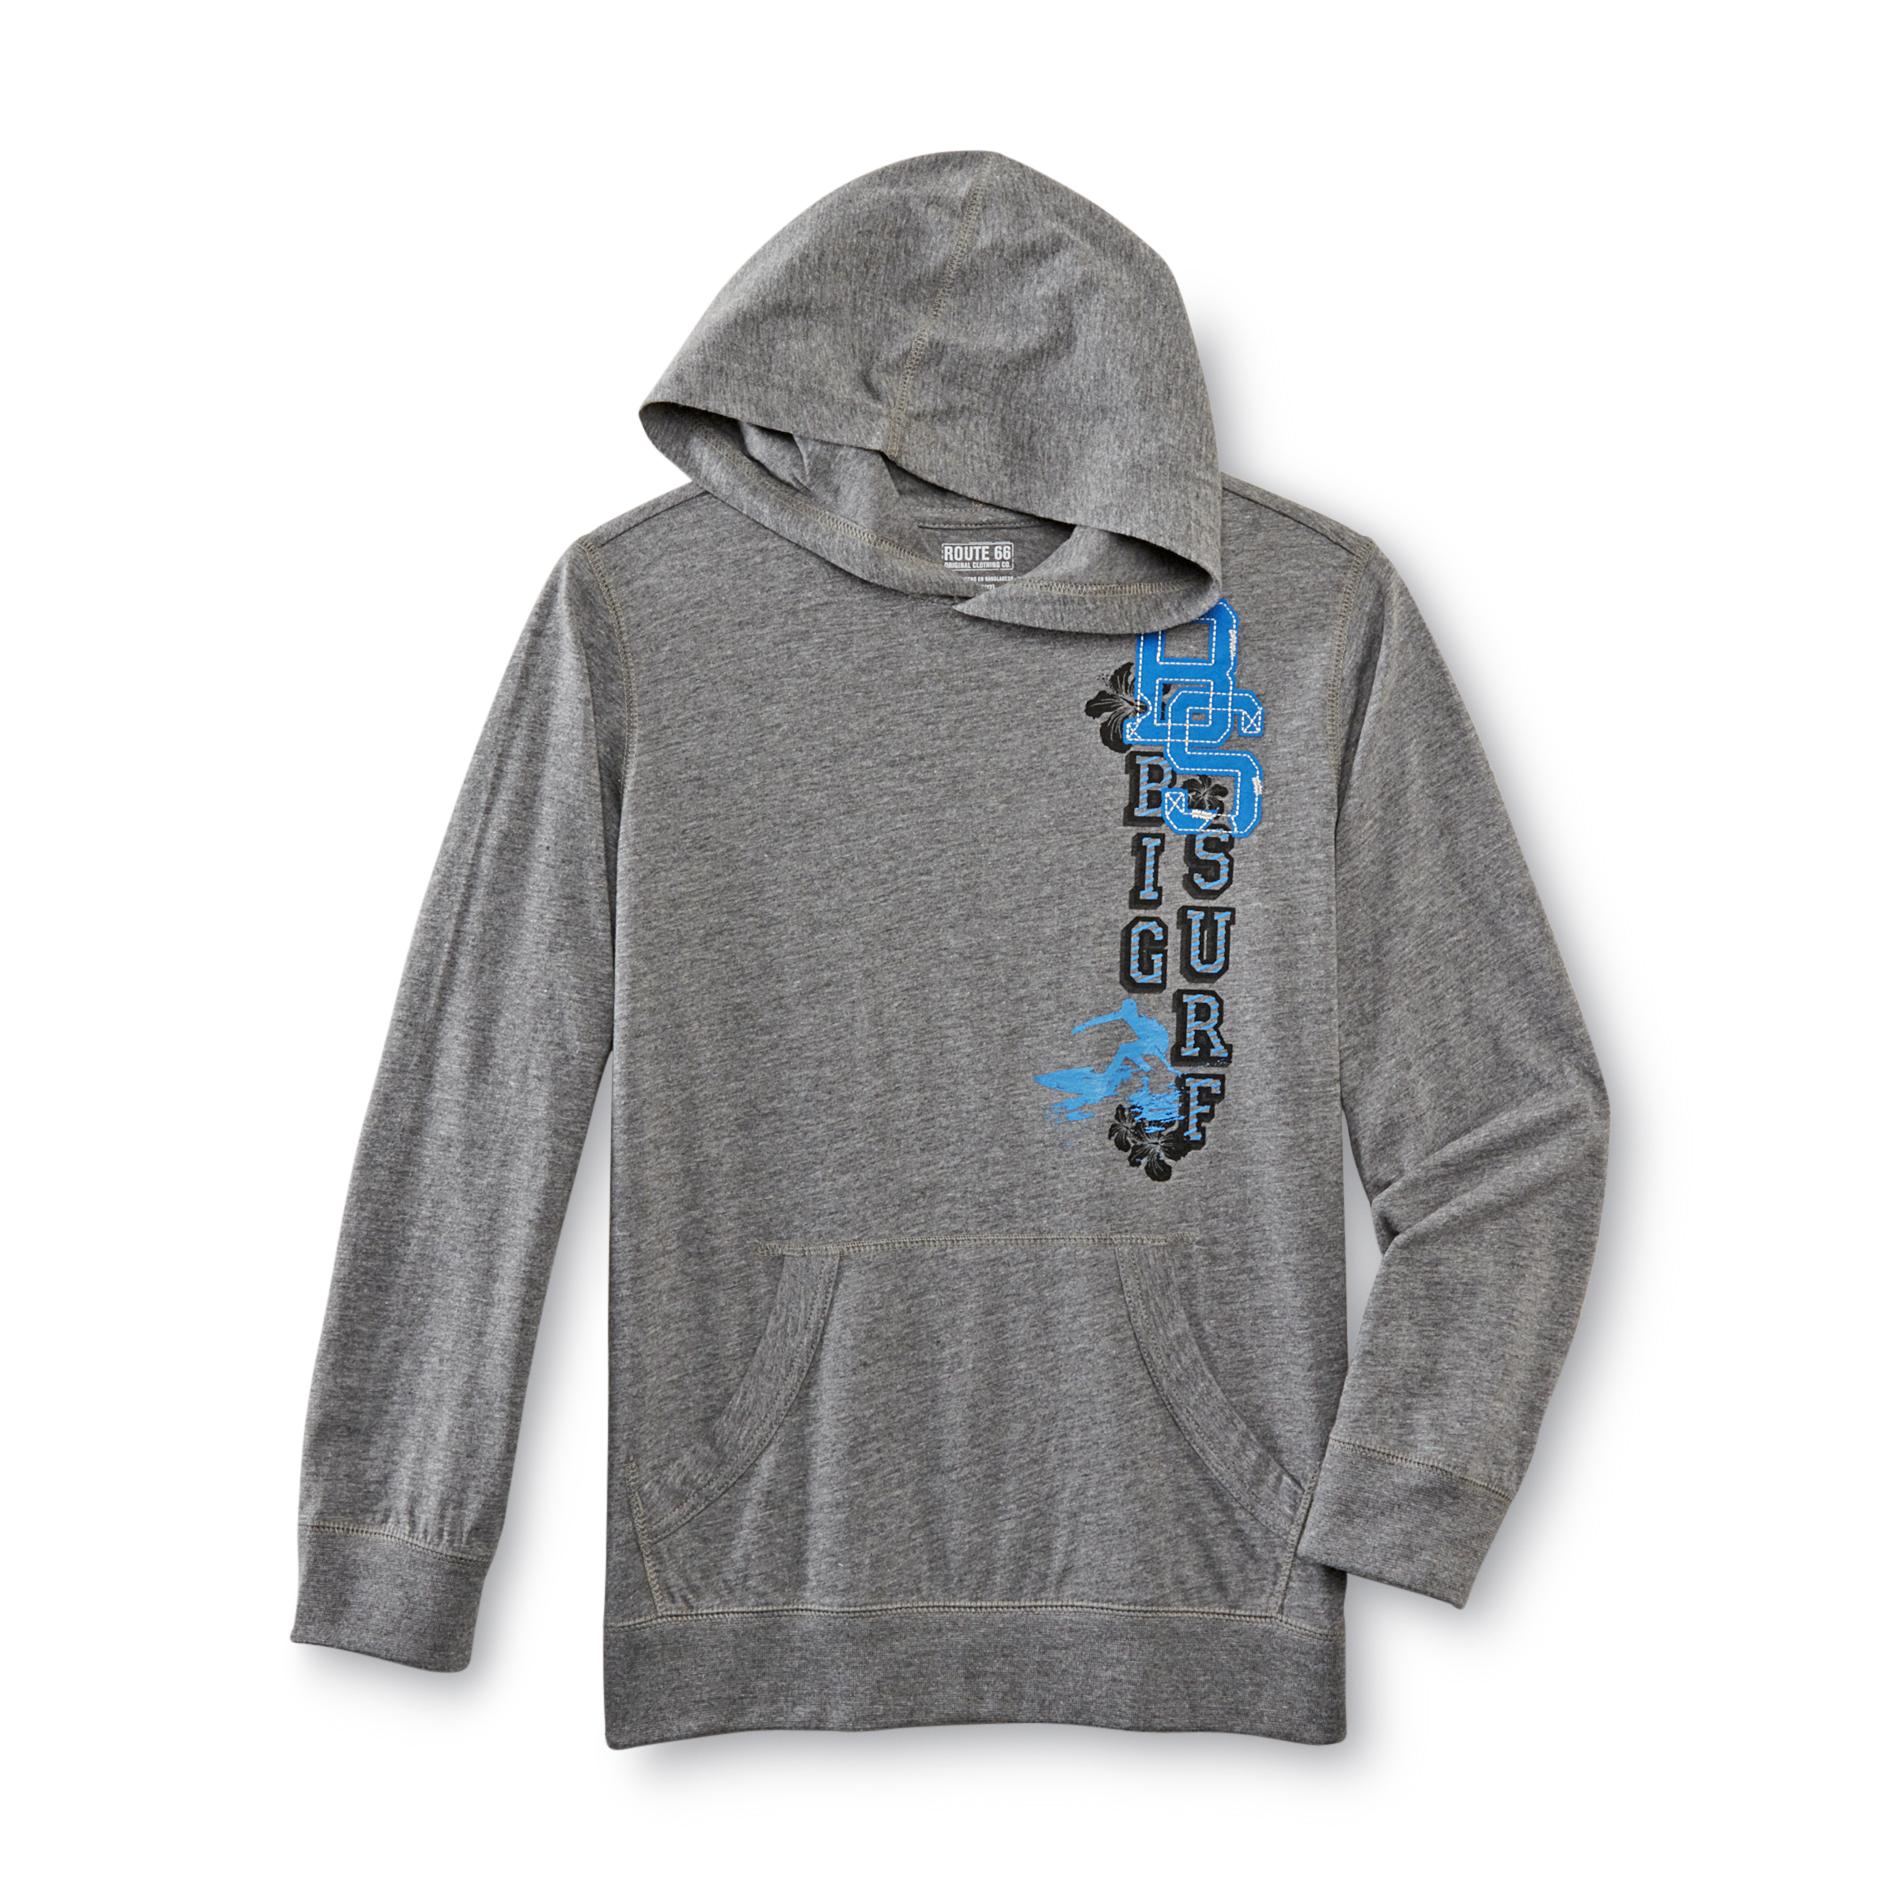 Route 66 Boy's Graphic Hoodie - Big Surf